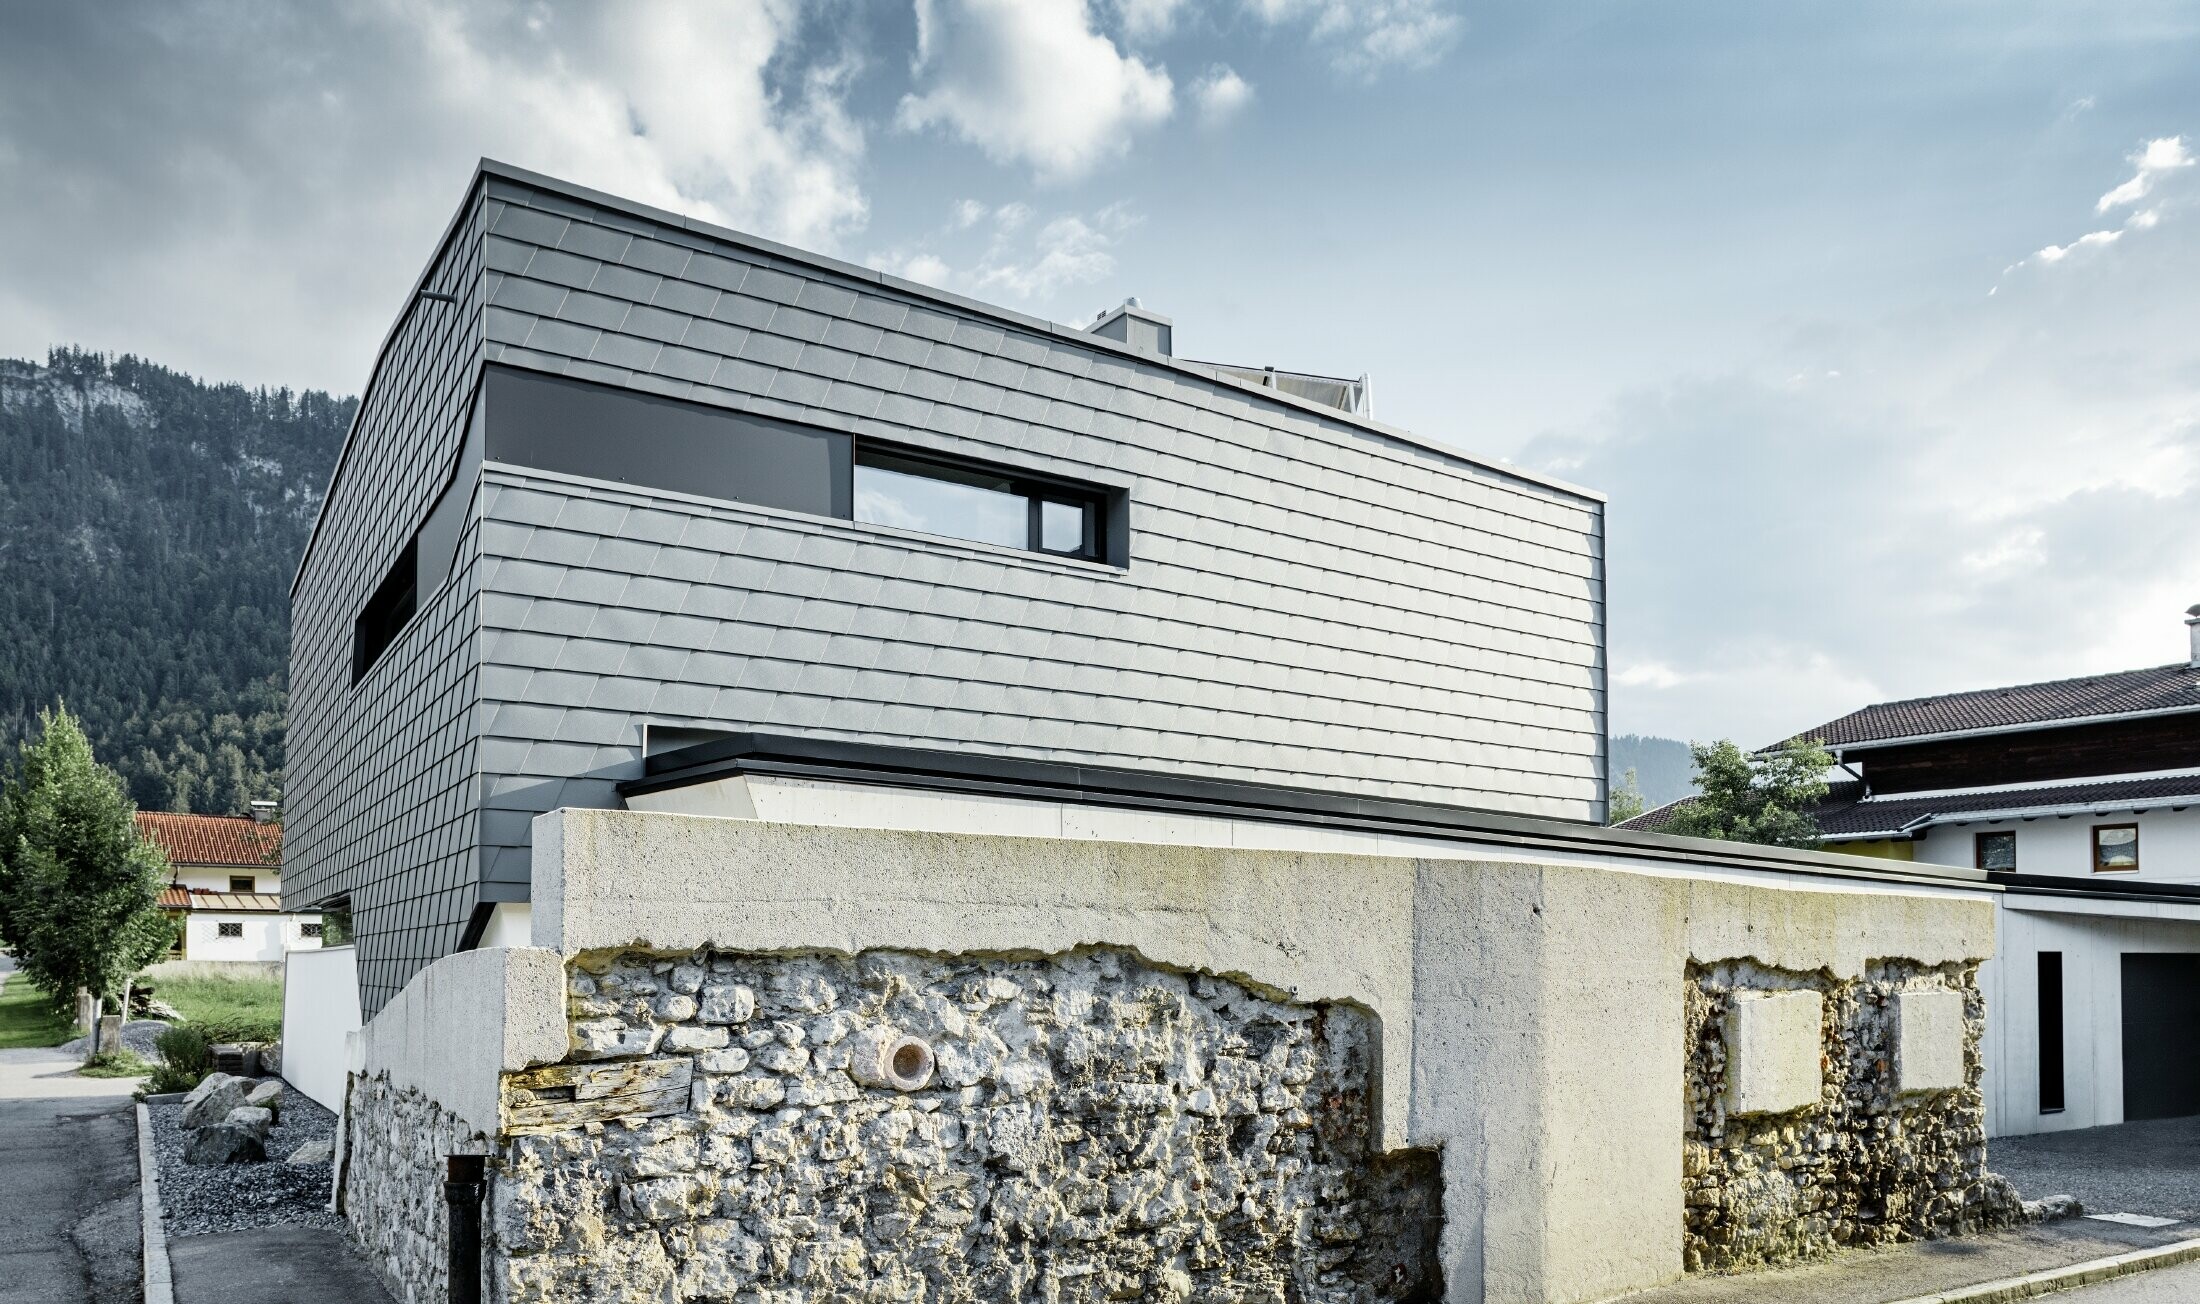 Modern detached house with a flat roof, large windows and a shingle façade in light grey, made of aluminium by PREFA